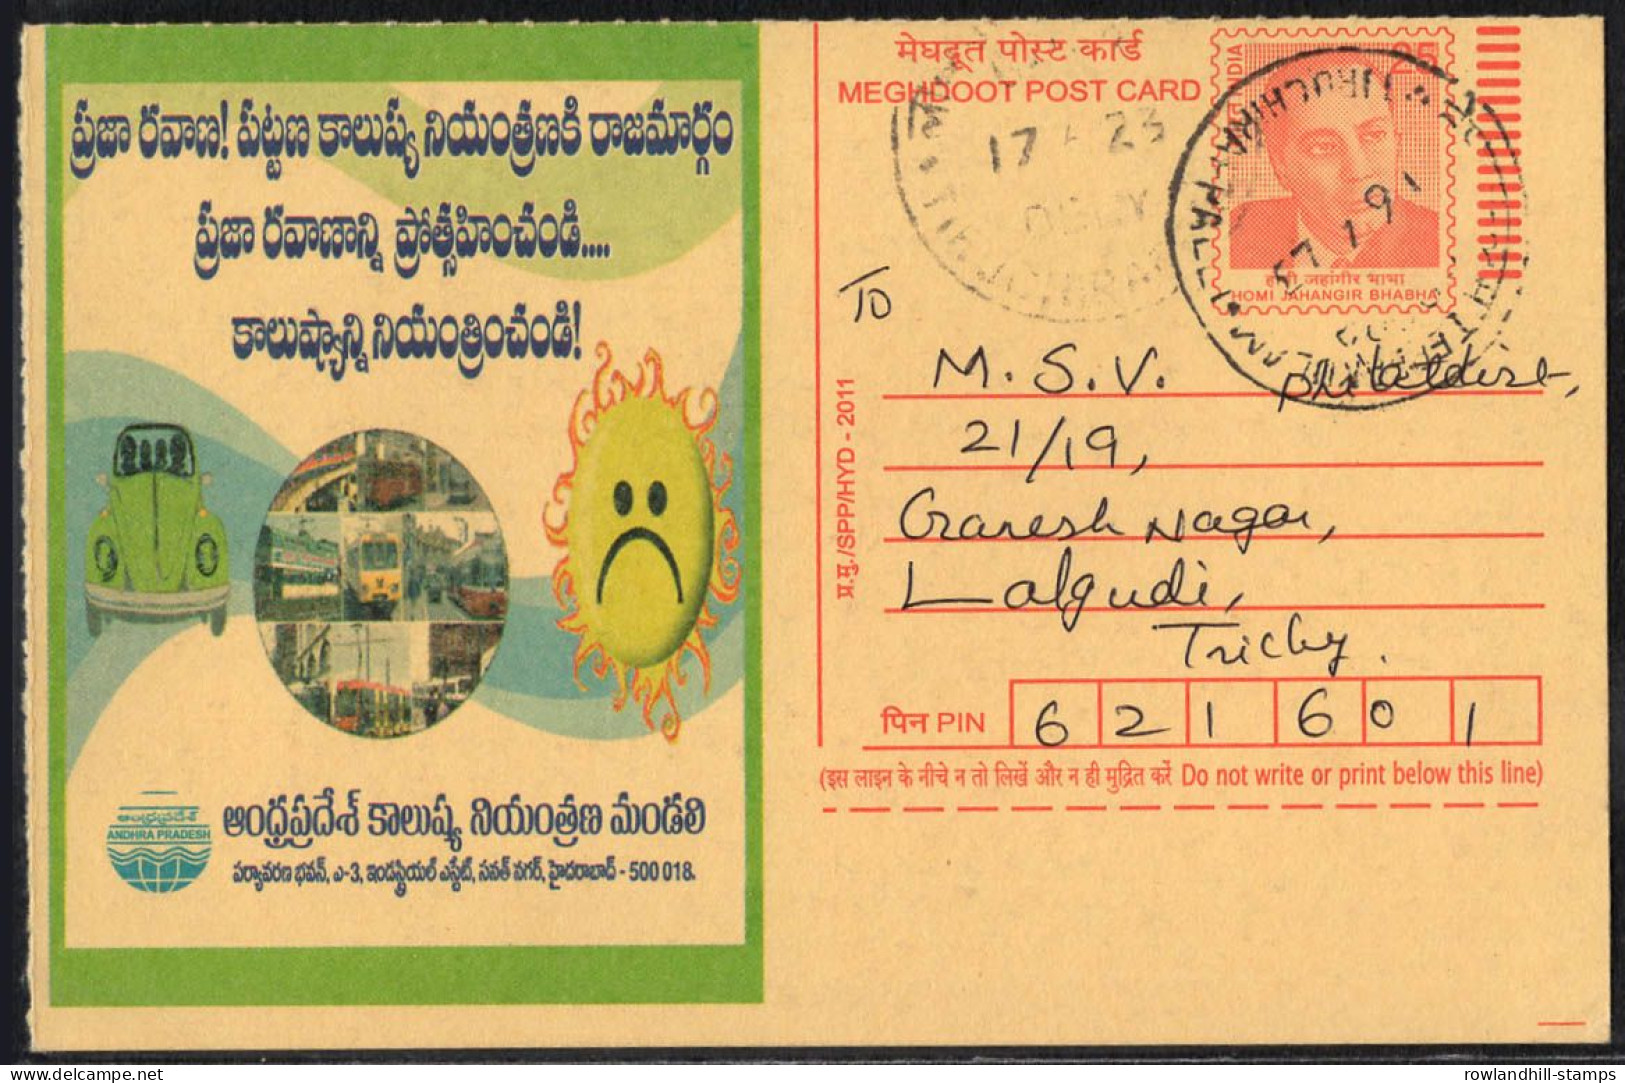 India, 2011, SAVE WATER, WATER CONSERVATION, Meghdoot Post Card, Used, Environment, Postcard, Energy, Sun, Andhra, B23 - Eau